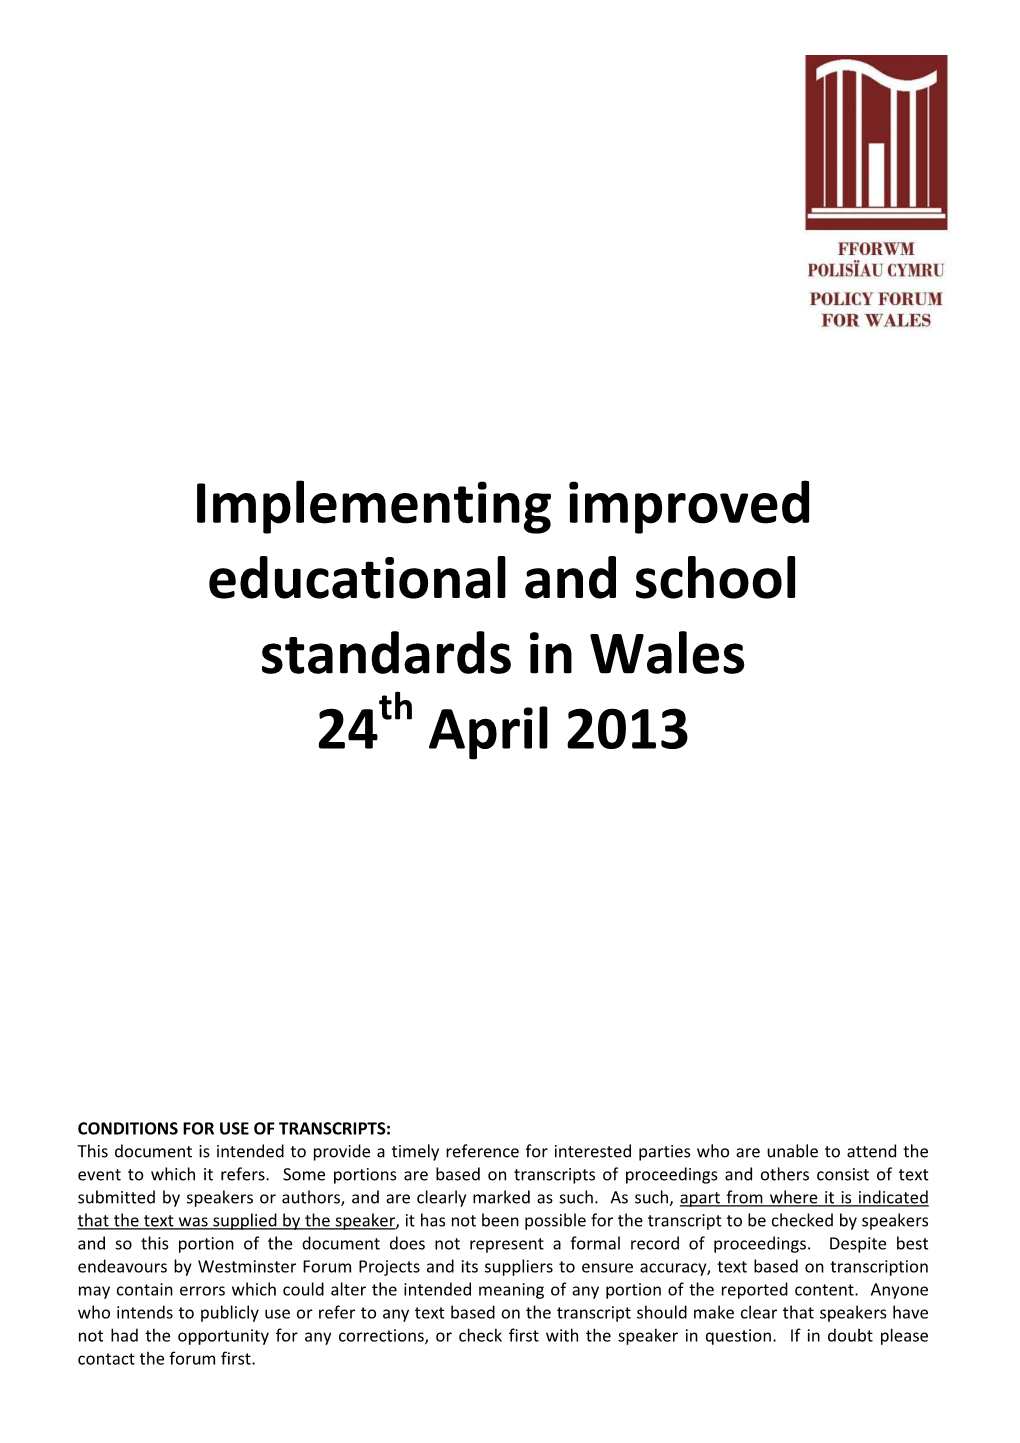 Implementing Improved Educational and School Standards in Wales 24Th April 2013